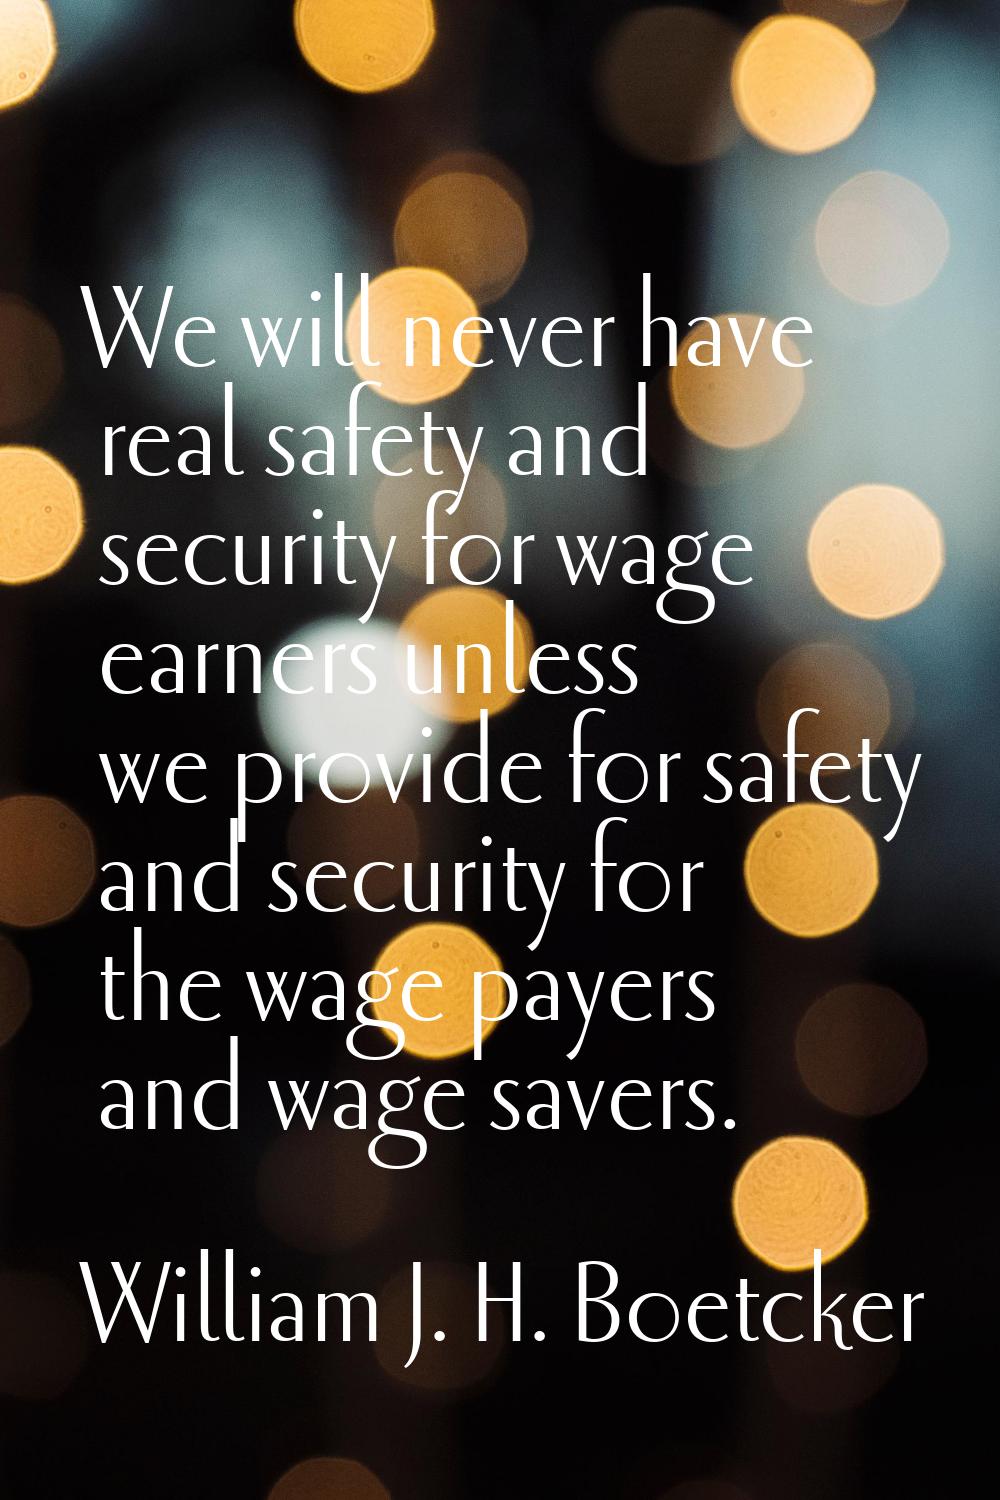 We will never have real safety and security for wage earners unless we provide for safety and secur